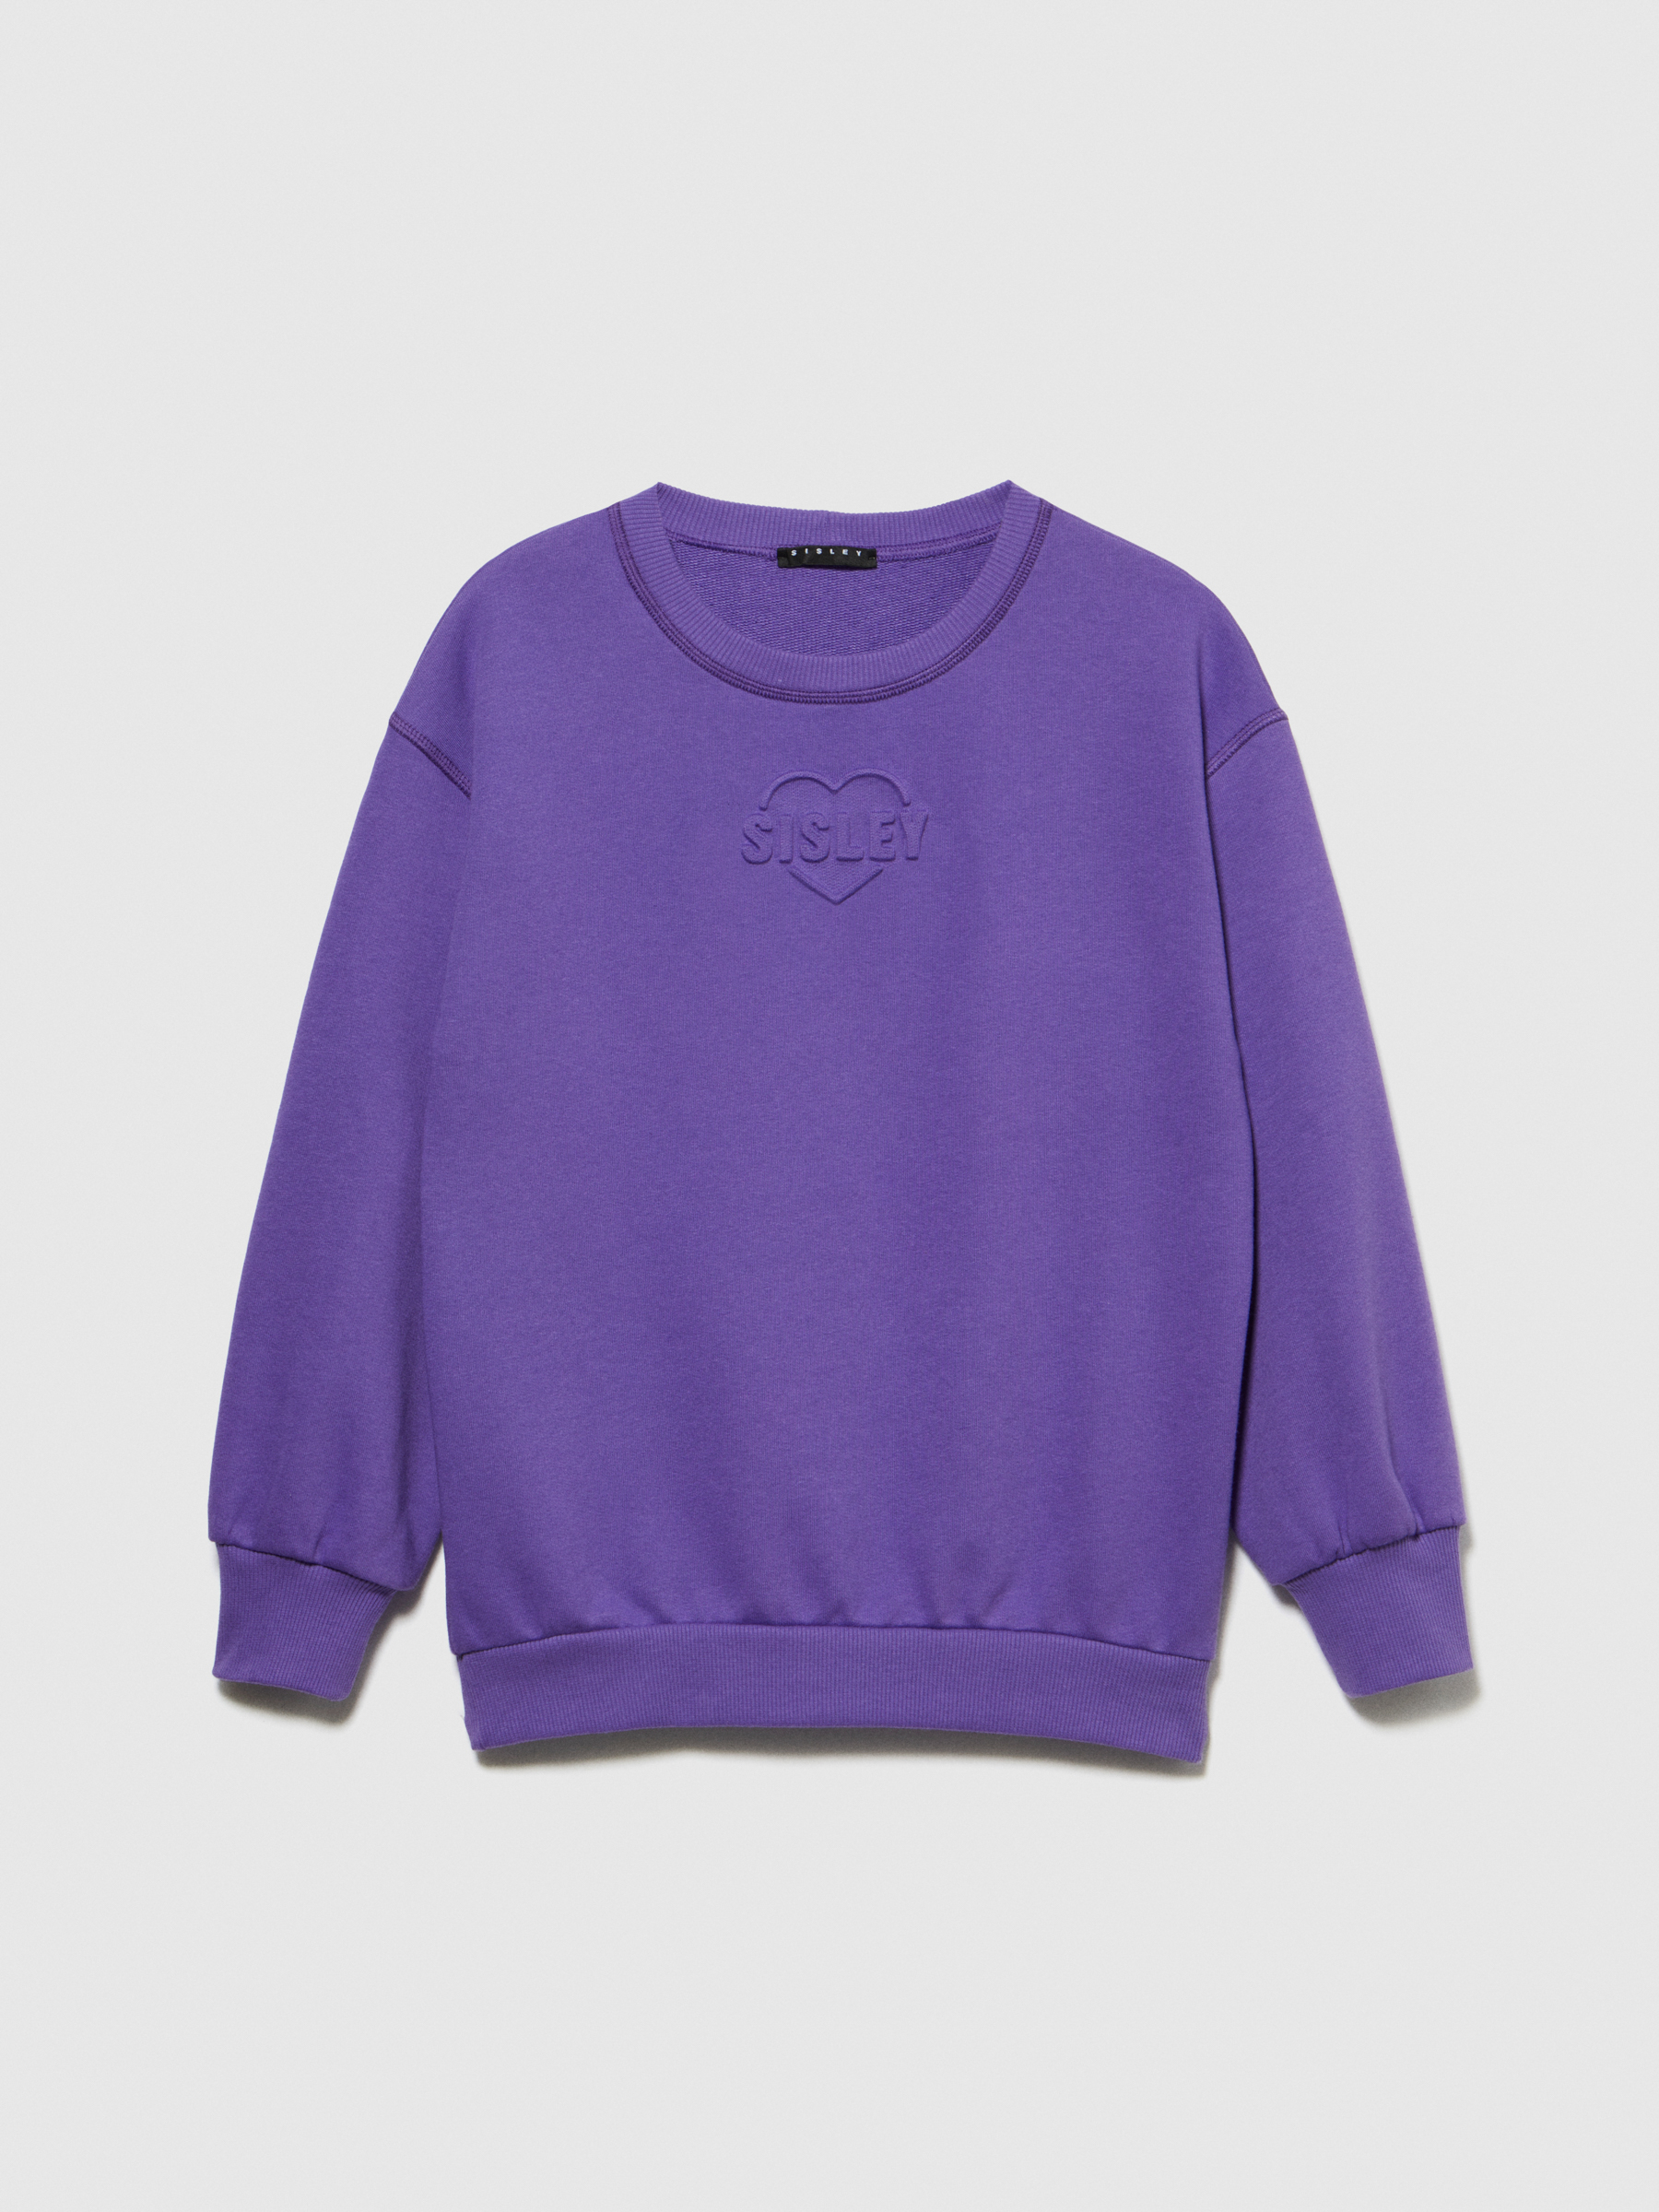 Sisley Young - Sweatshirt With Embossed Print, Woman, Violet, Size: S